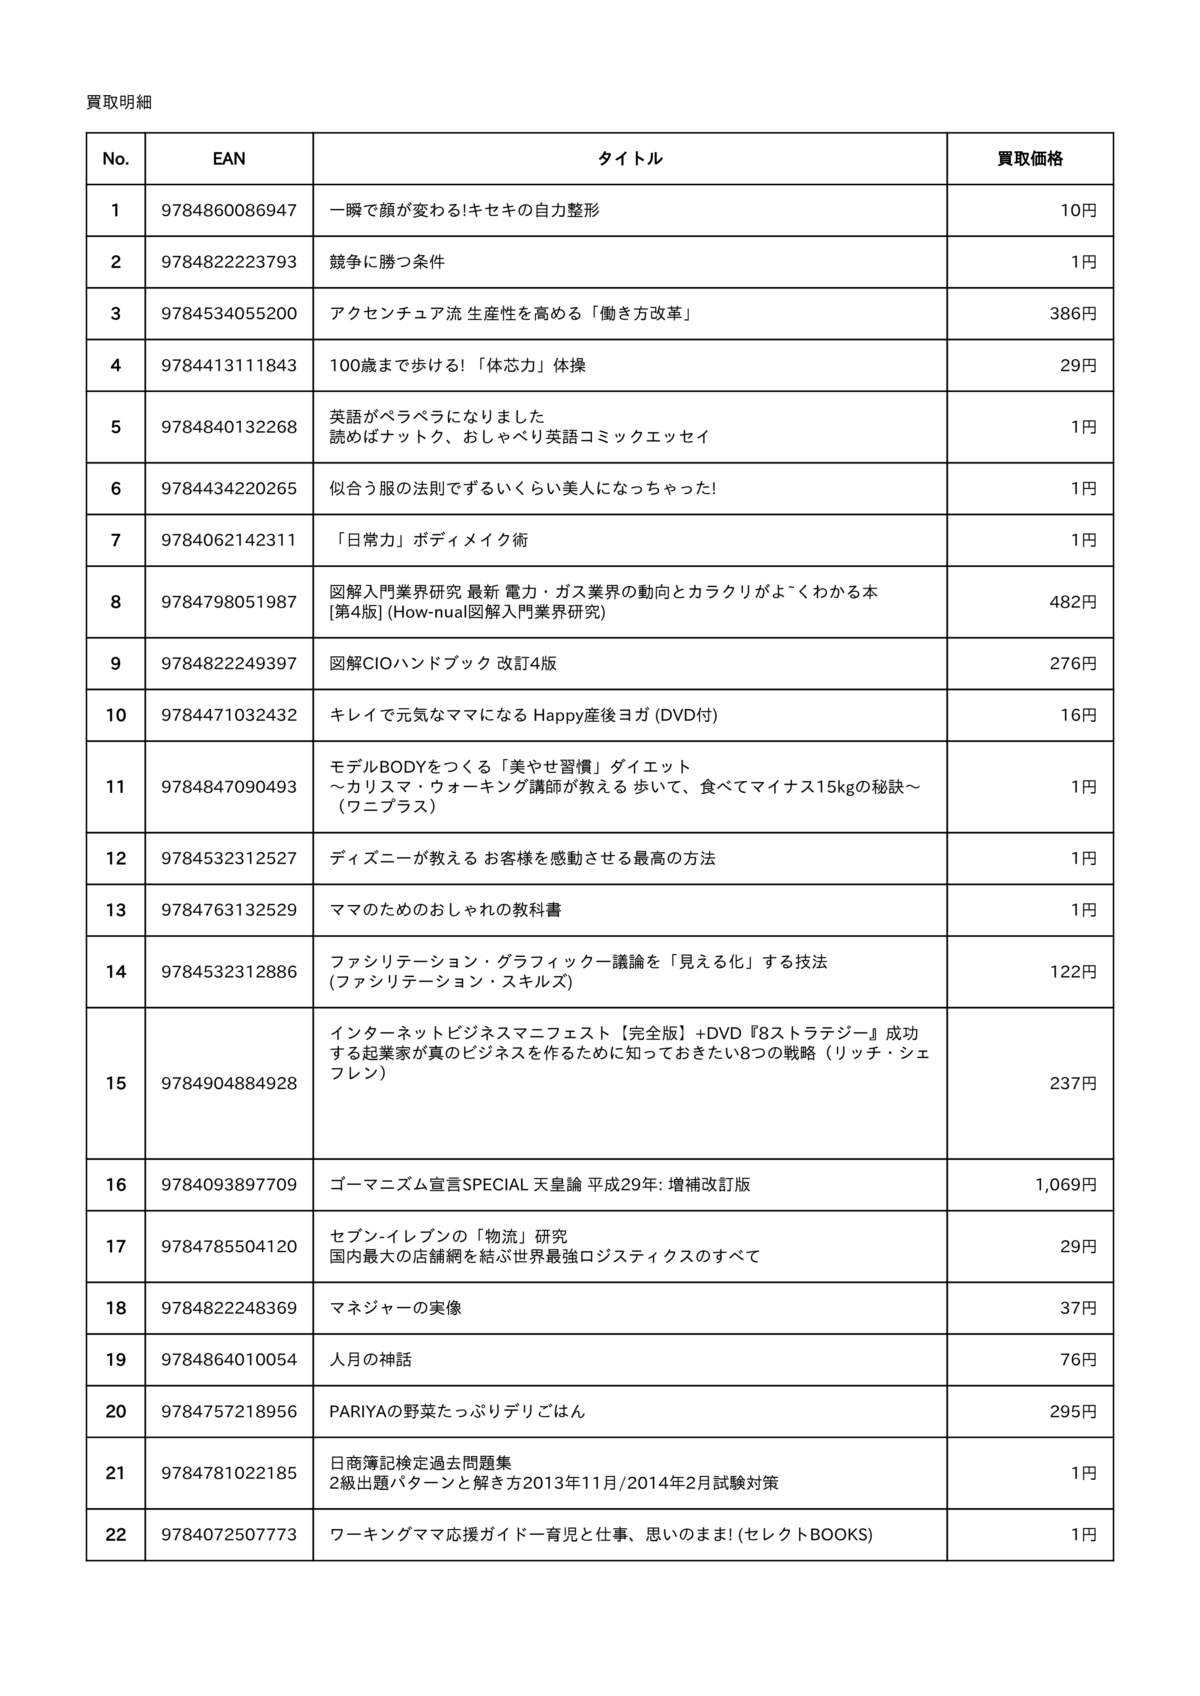 BUY王の査定結果明細 書籍 その1